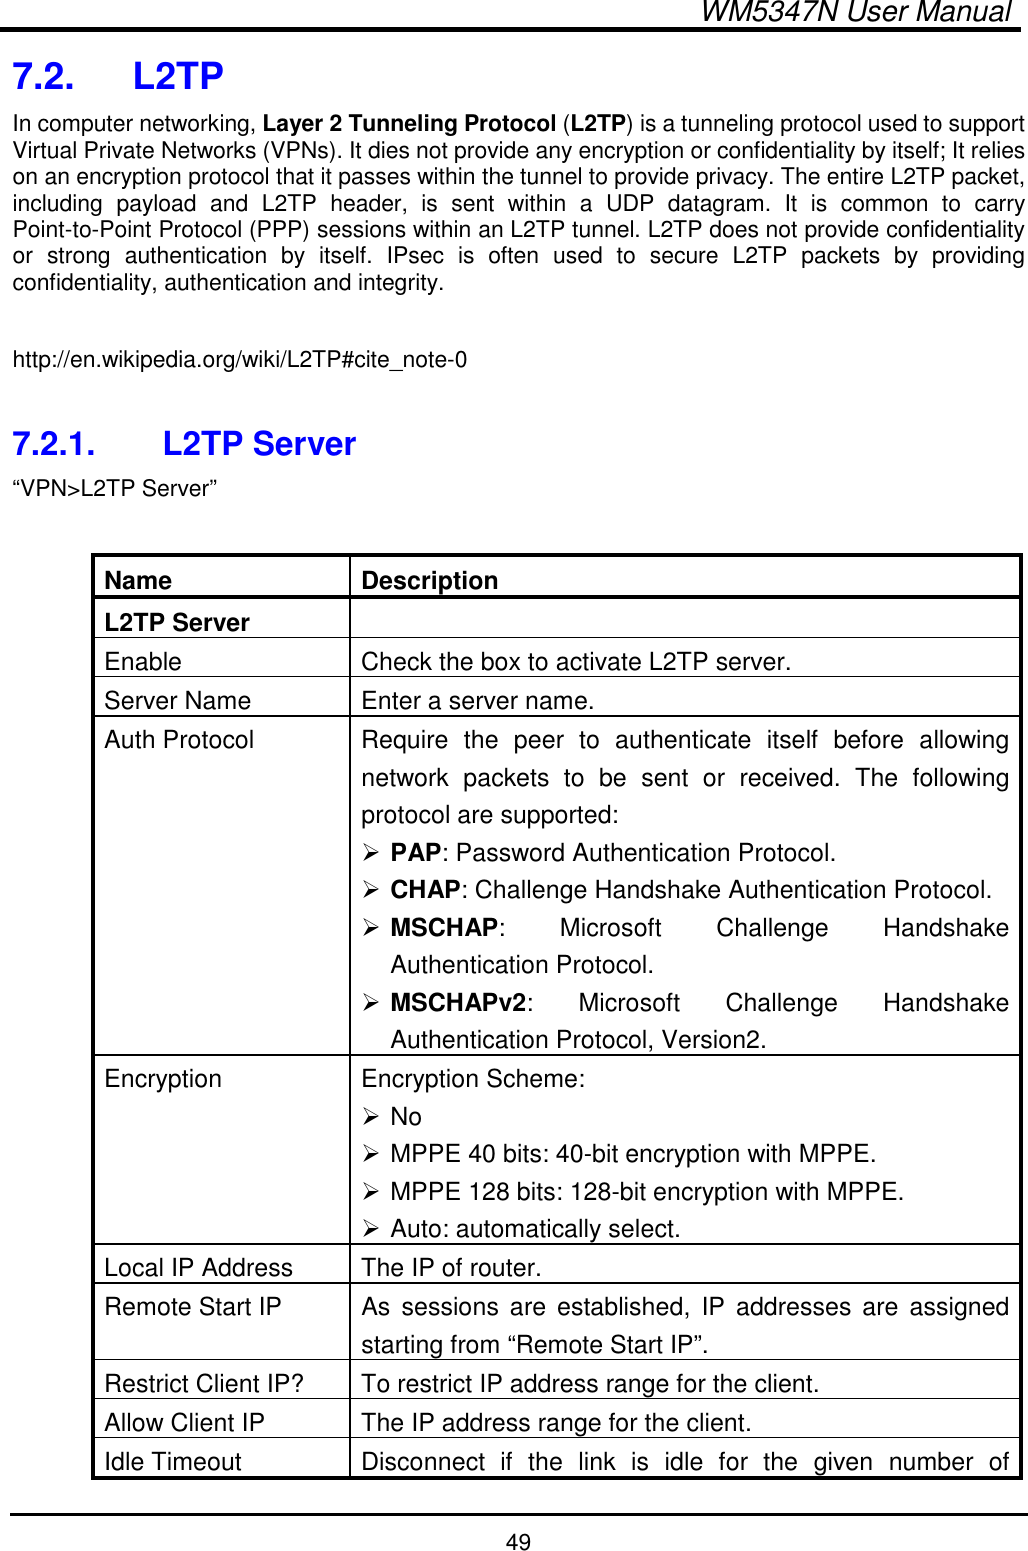  WM5347N User Manual  49 7.2.  L2TP In computer networking, Layer 2 Tunneling Protocol (L2TP) is a tunneling protocol used to support Virtual Private Networks (VPNs). It dies not provide any encryption or confidentiality by itself; It relies on an encryption protocol that it passes within the tunnel to provide privacy. The entire L2TP packet, including  payload  and  L2TP  header,  is  sent  within  a  UDP  datagram.  It  is  common  to  carry Point-to-Point Protocol (PPP) sessions within an L2TP tunnel. L2TP does not provide confidentiality or  strong  authentication  by  itself.  IPsec  is  often  used  to  secure  L2TP  packets  by  providing confidentiality, authentication and integrity.  http://en.wikipedia.org/wiki/L2TP#cite_note-0  7.2.1.  L2TP Server “VPN&gt;L2TP Server”  Name  Description L2TP Server   Enable  Check the box to activate L2TP server. Server Name  Enter a server name. Auth Protocol  Require  the  peer  to  authenticate  itself  before  allowing network  packets  to  be  sent  or  received.  The  following protocol are supported:  PAP: Password Authentication Protocol.  CHAP: Challenge Handshake Authentication Protocol.  MSCHAP:  Microsoft  Challenge  Handshake Authentication Protocol.  MSCHAPv2:  Microsoft  Challenge  Handshake Authentication Protocol, Version2. Encryption  Encryption Scheme:  No  MPPE 40 bits: 40-bit encryption with MPPE.  MPPE 128 bits: 128-bit encryption with MPPE.  Auto: automatically select. Local IP Address  The IP of router. Remote Start IP  As  sessions  are  established,  IP  addresses  are  assigned starting from “Remote Start IP”. Restrict Client IP?  To restrict IP address range for the client. Allow Client IP  The IP address range for the client. Idle Timeout  Disconnect  if  the  link  is  idle  for  the  given  number  of 